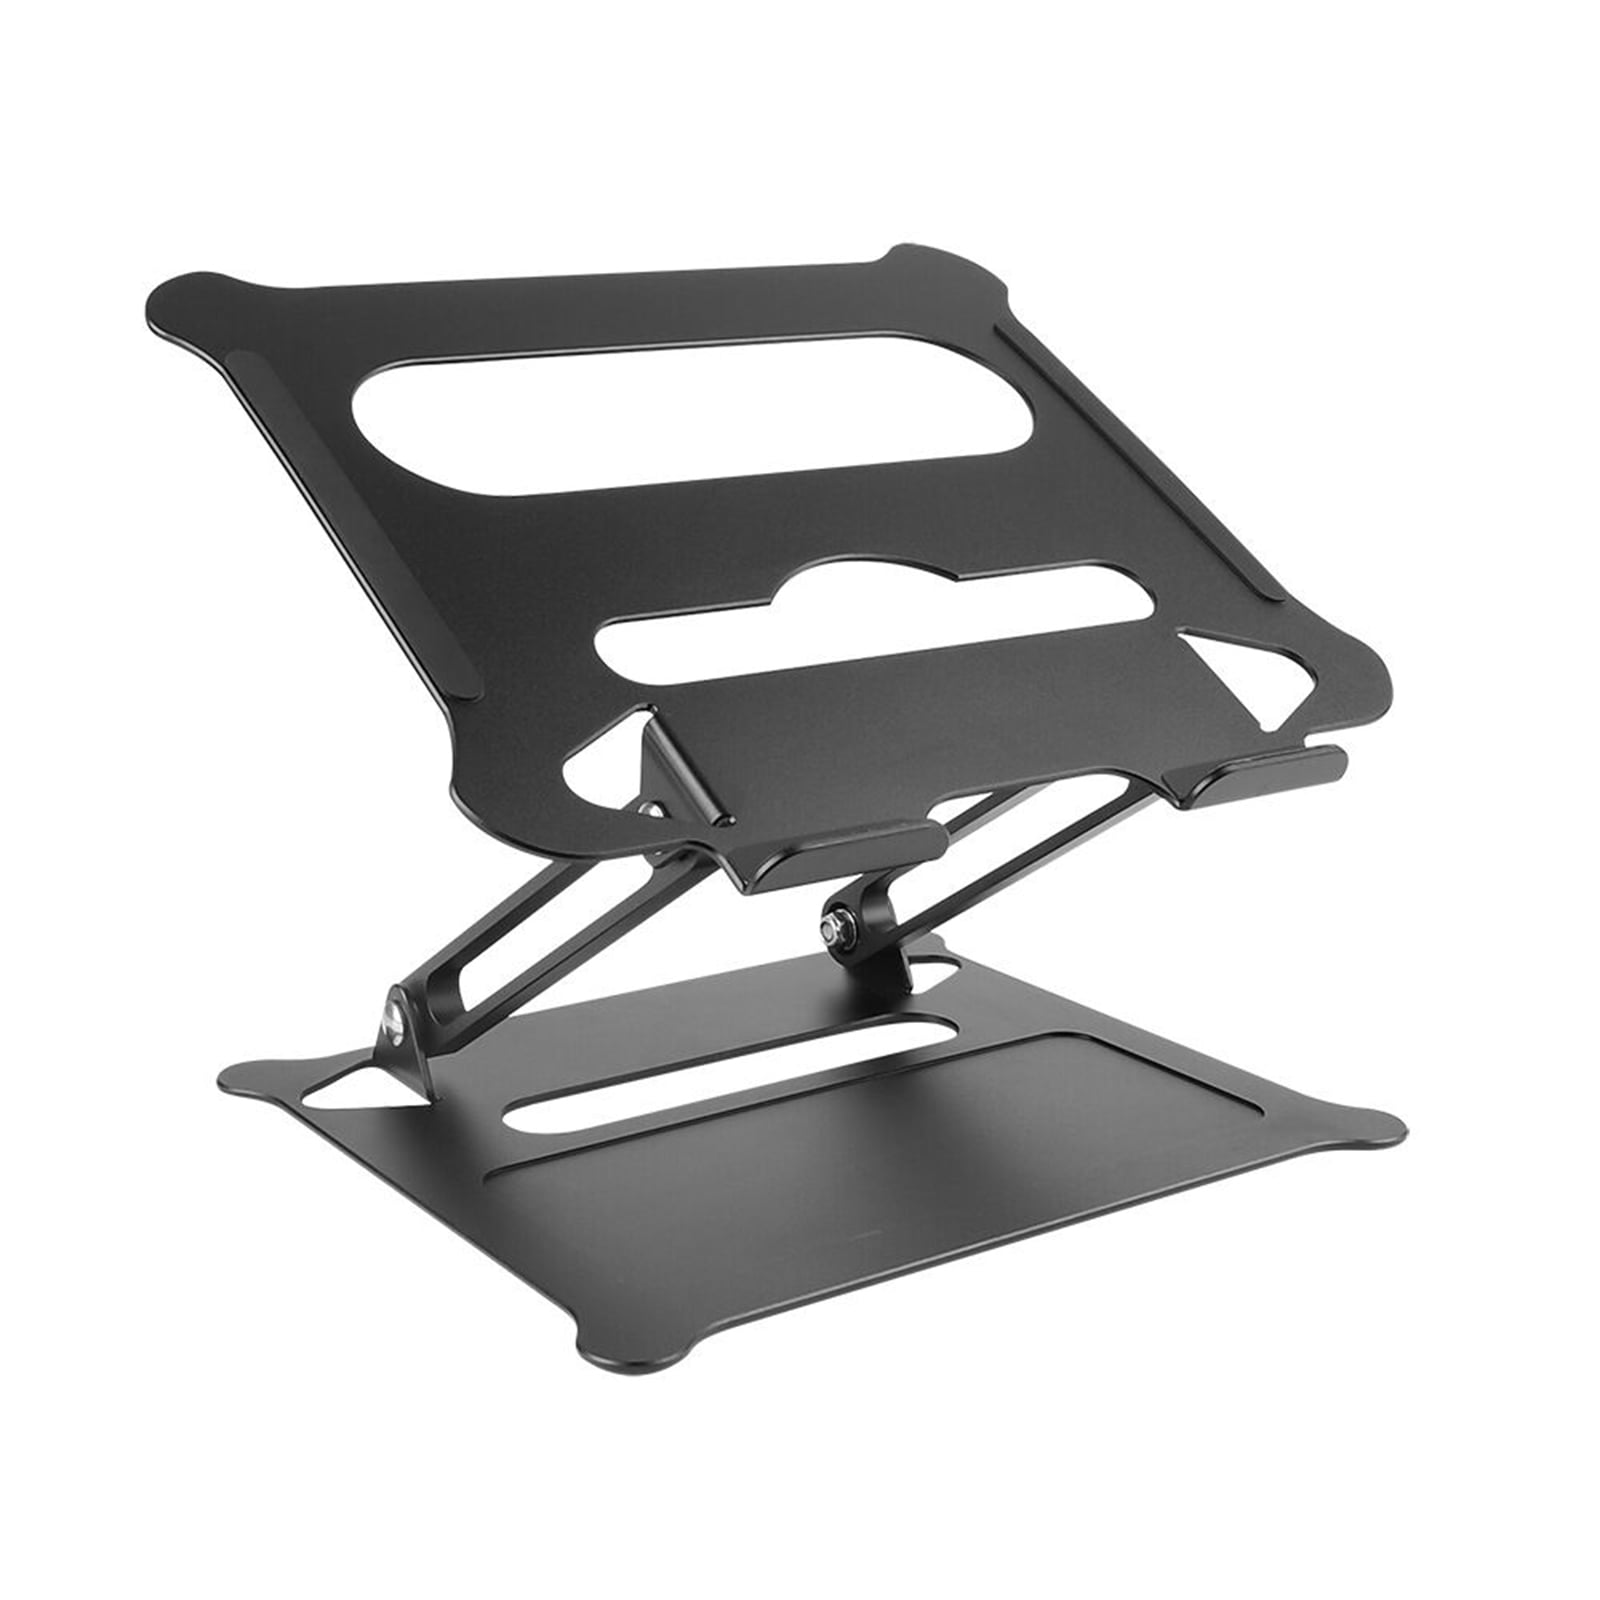 Laptop Stand Adjustable Height Recliner Laptop Stand Aluminum Alloy Desktop Laptop Holder Foldable Ventilated Adjustable Height Hollow Heat Dissipation Silver Portable Laptop Stand